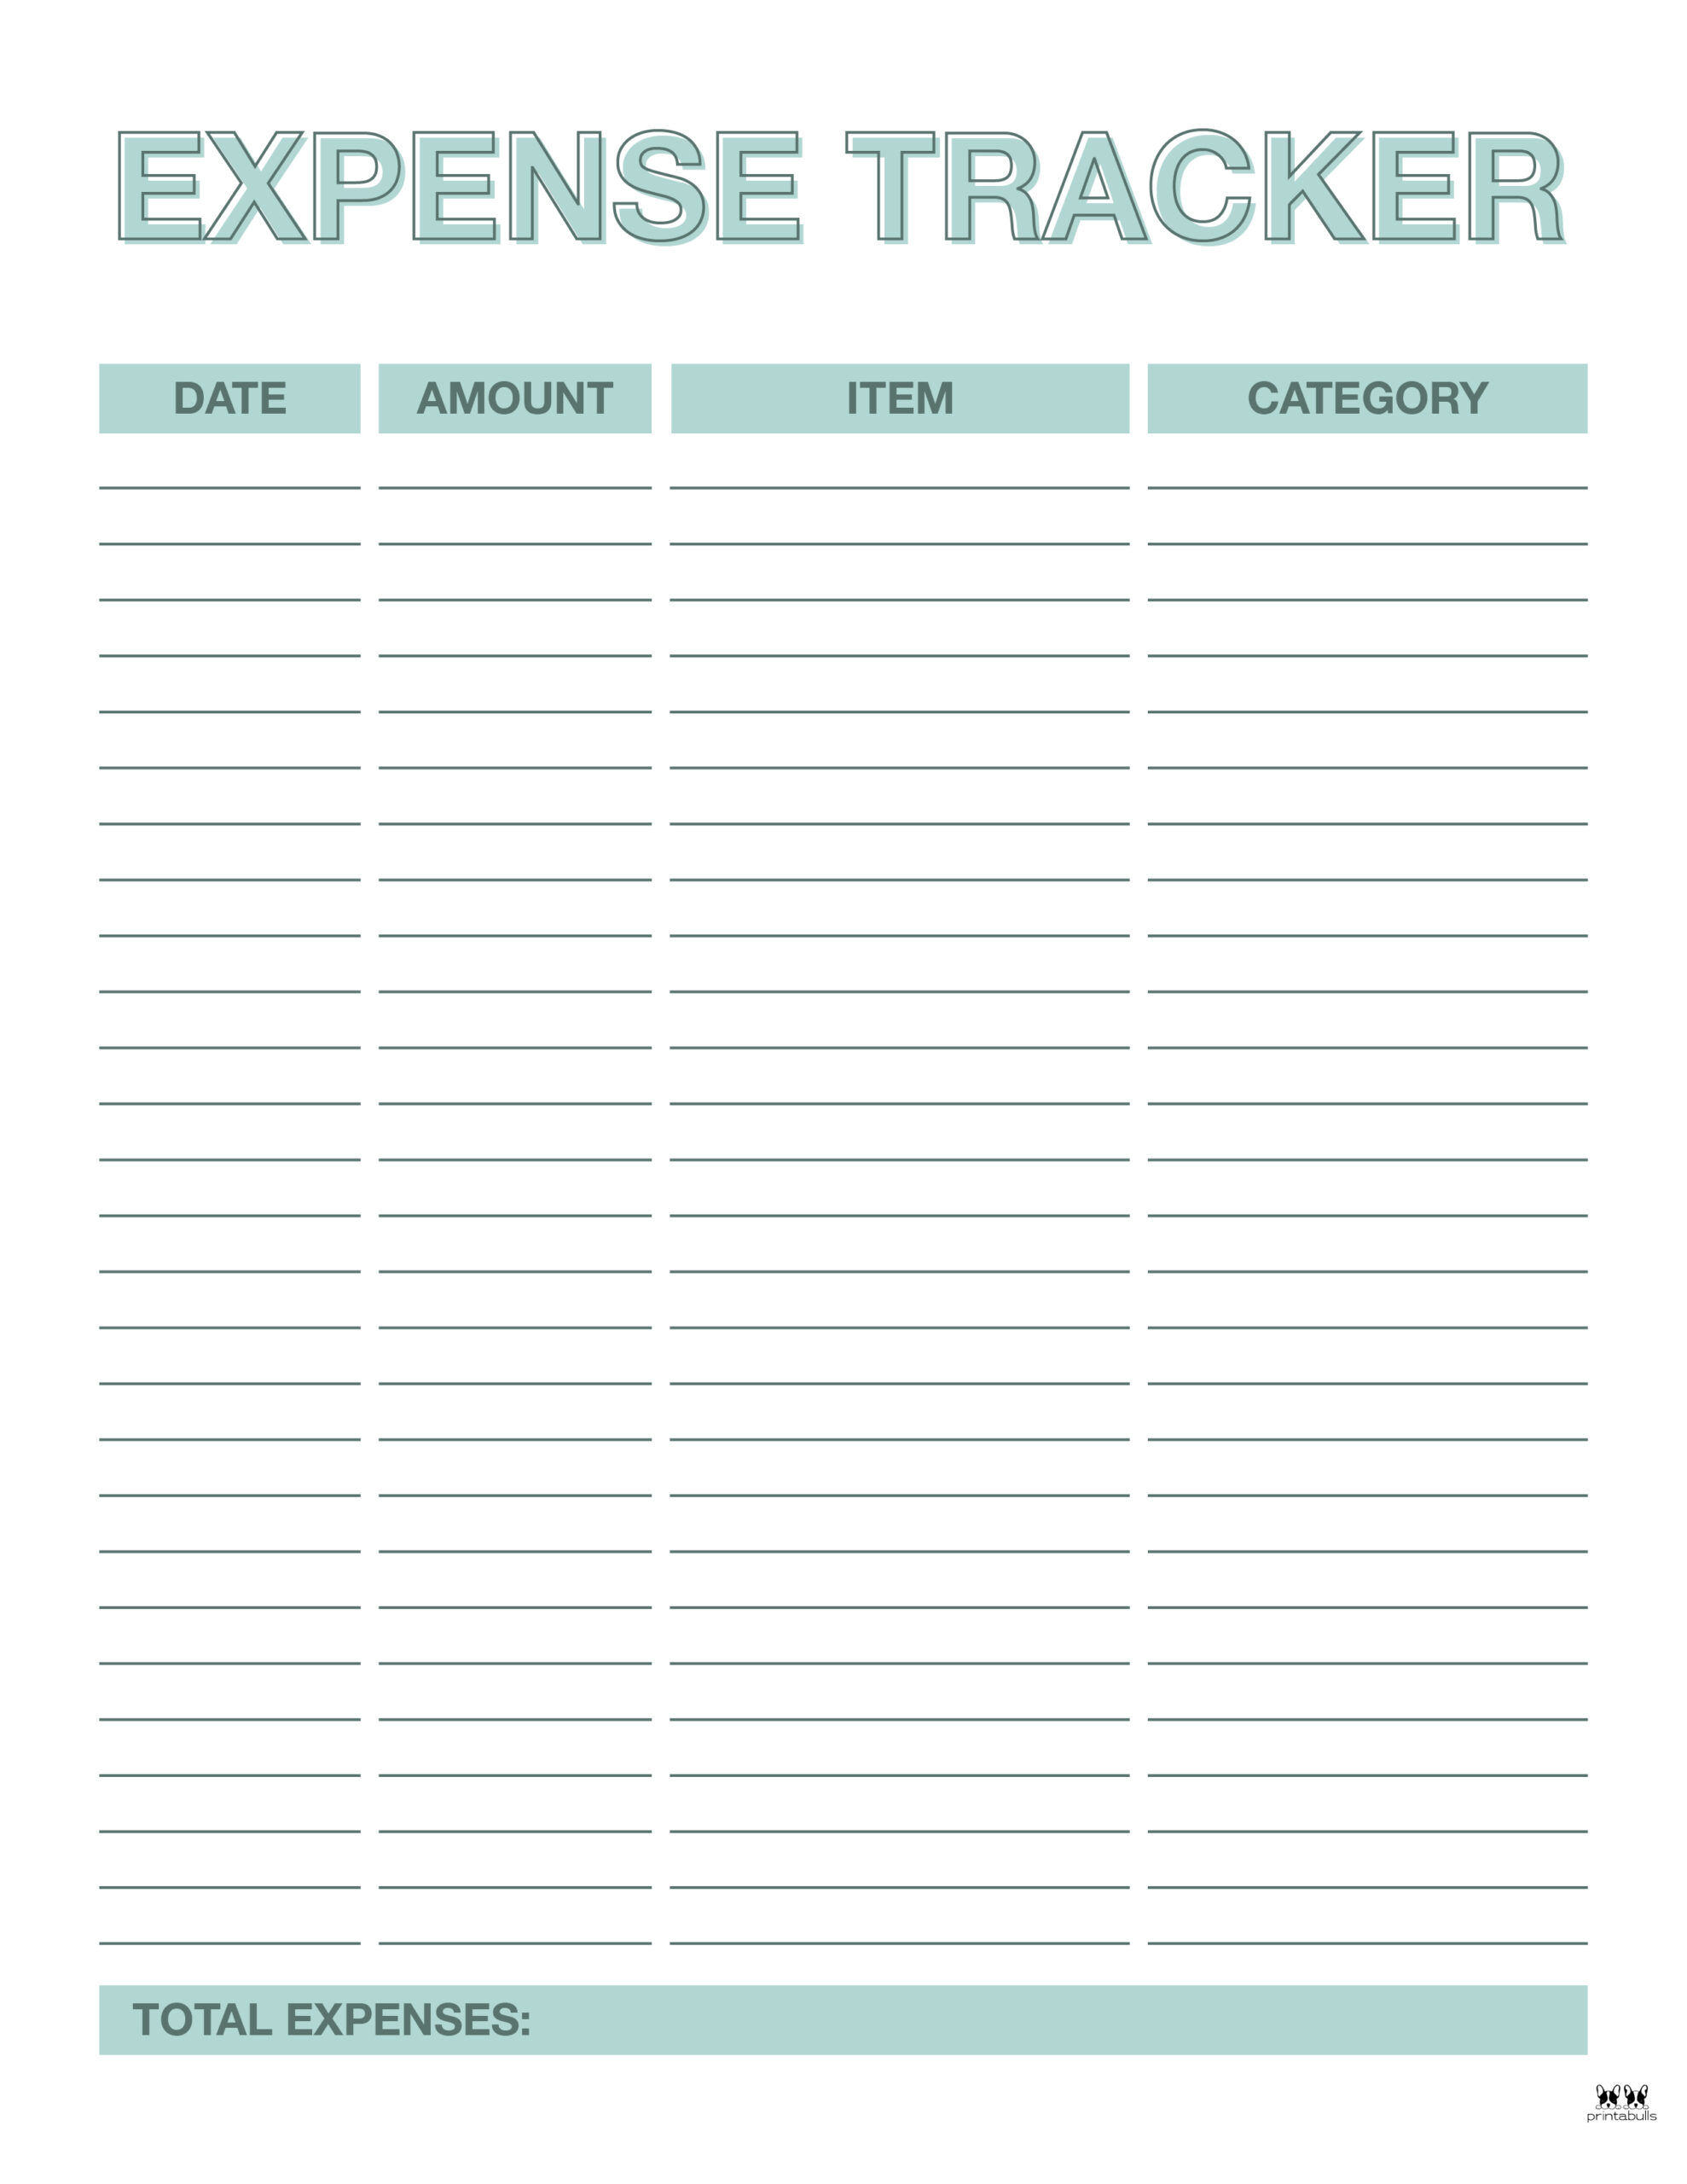 expense-tracker-printable-charlotte-clergy-coalition-uncommonly-google-unique-ways-to-use